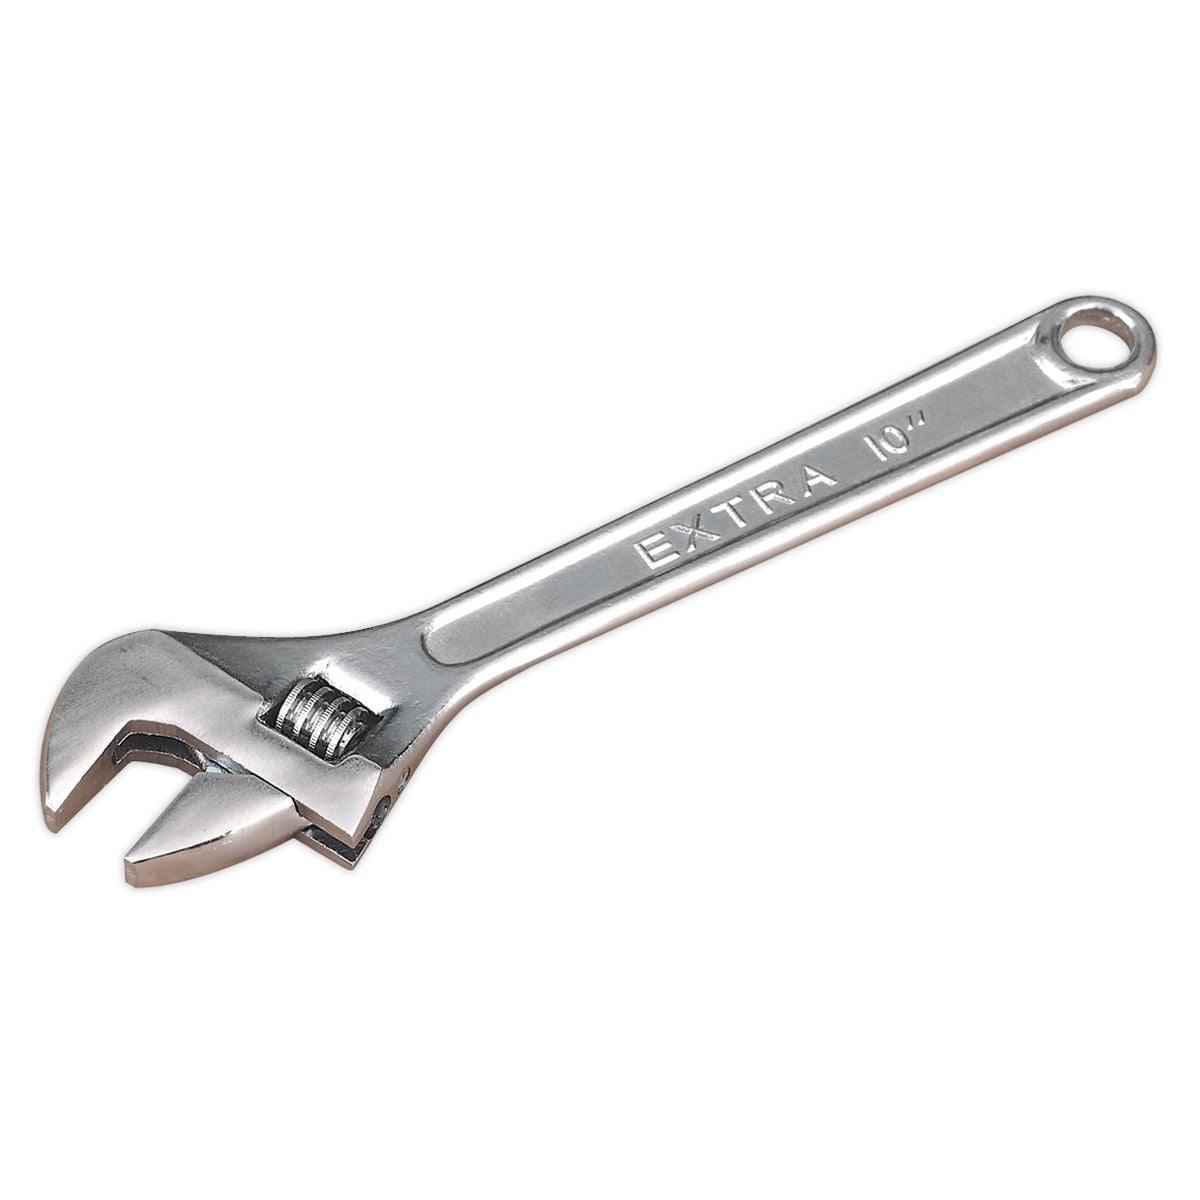 Siegen by Sealey Adjustable Wrench 250mm